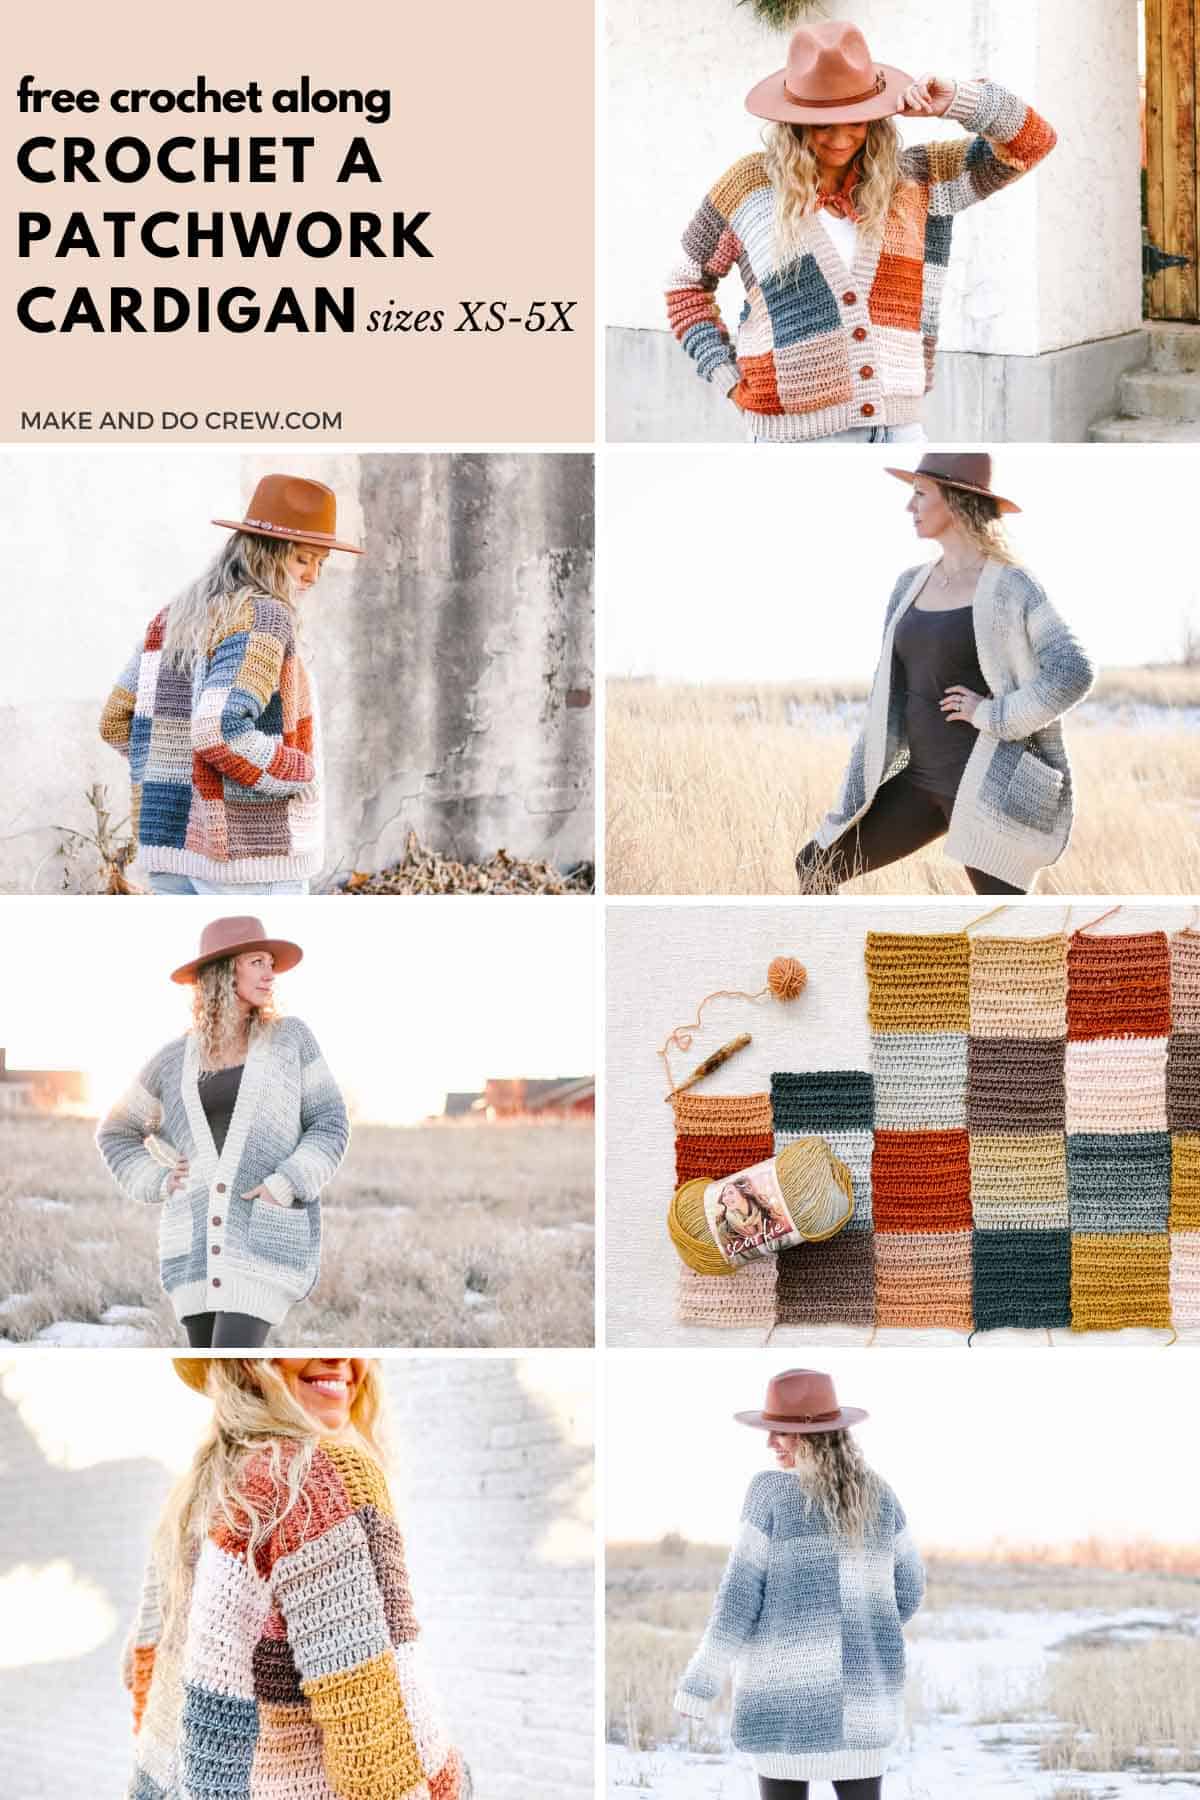 This image shows a grid of photos of a woman wearing a patchwork crochet cardigan. One version is colorful, quilt inspired patchwork style sweater. The other version is a neutral colored oversized cardigan with pockets. 